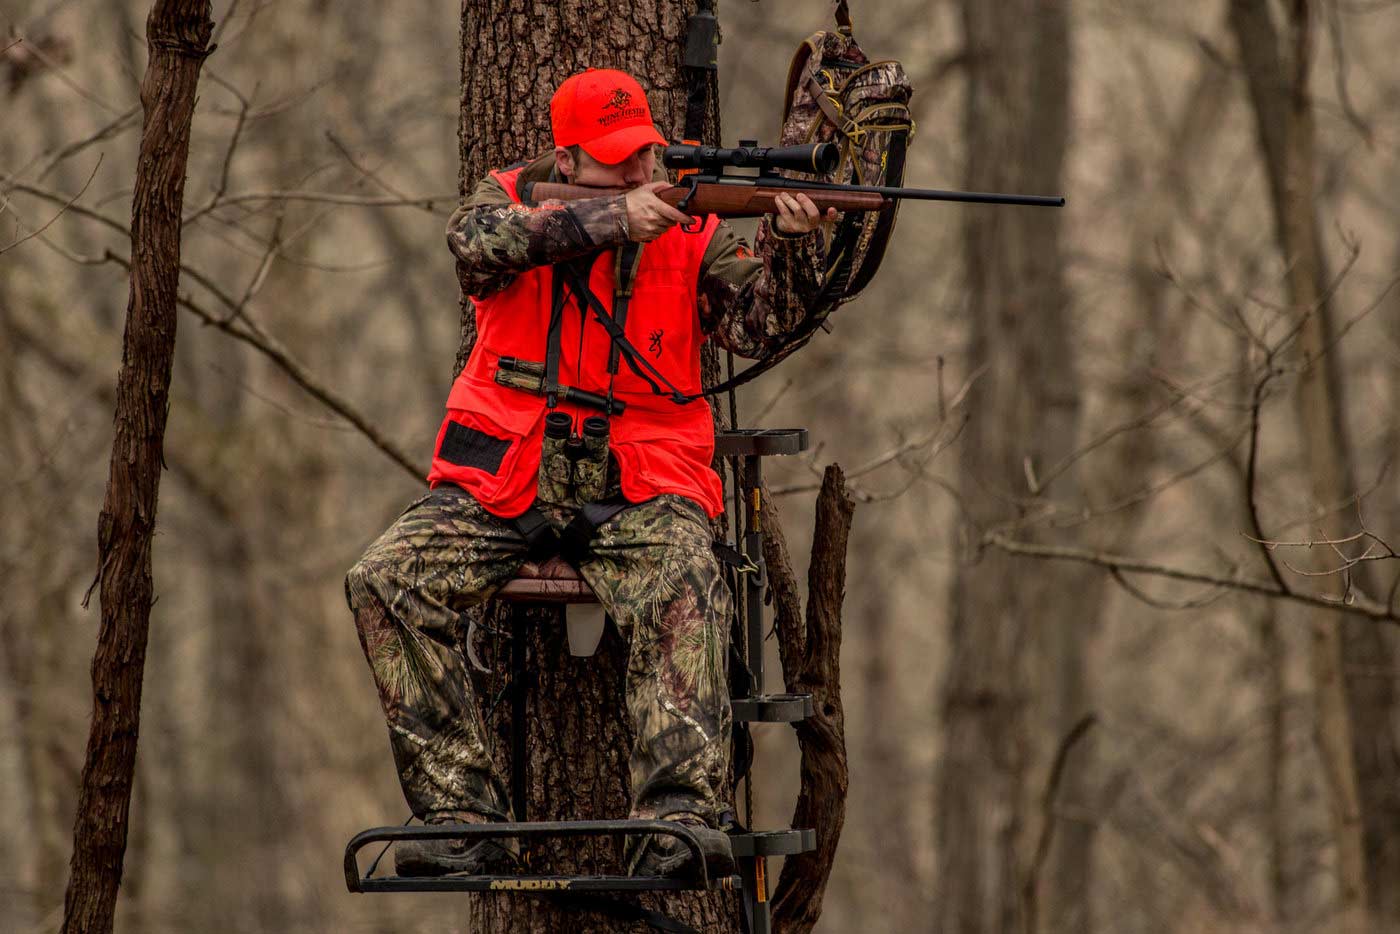 A hunter in an orange vest and hat fires a rifle from a treestand.